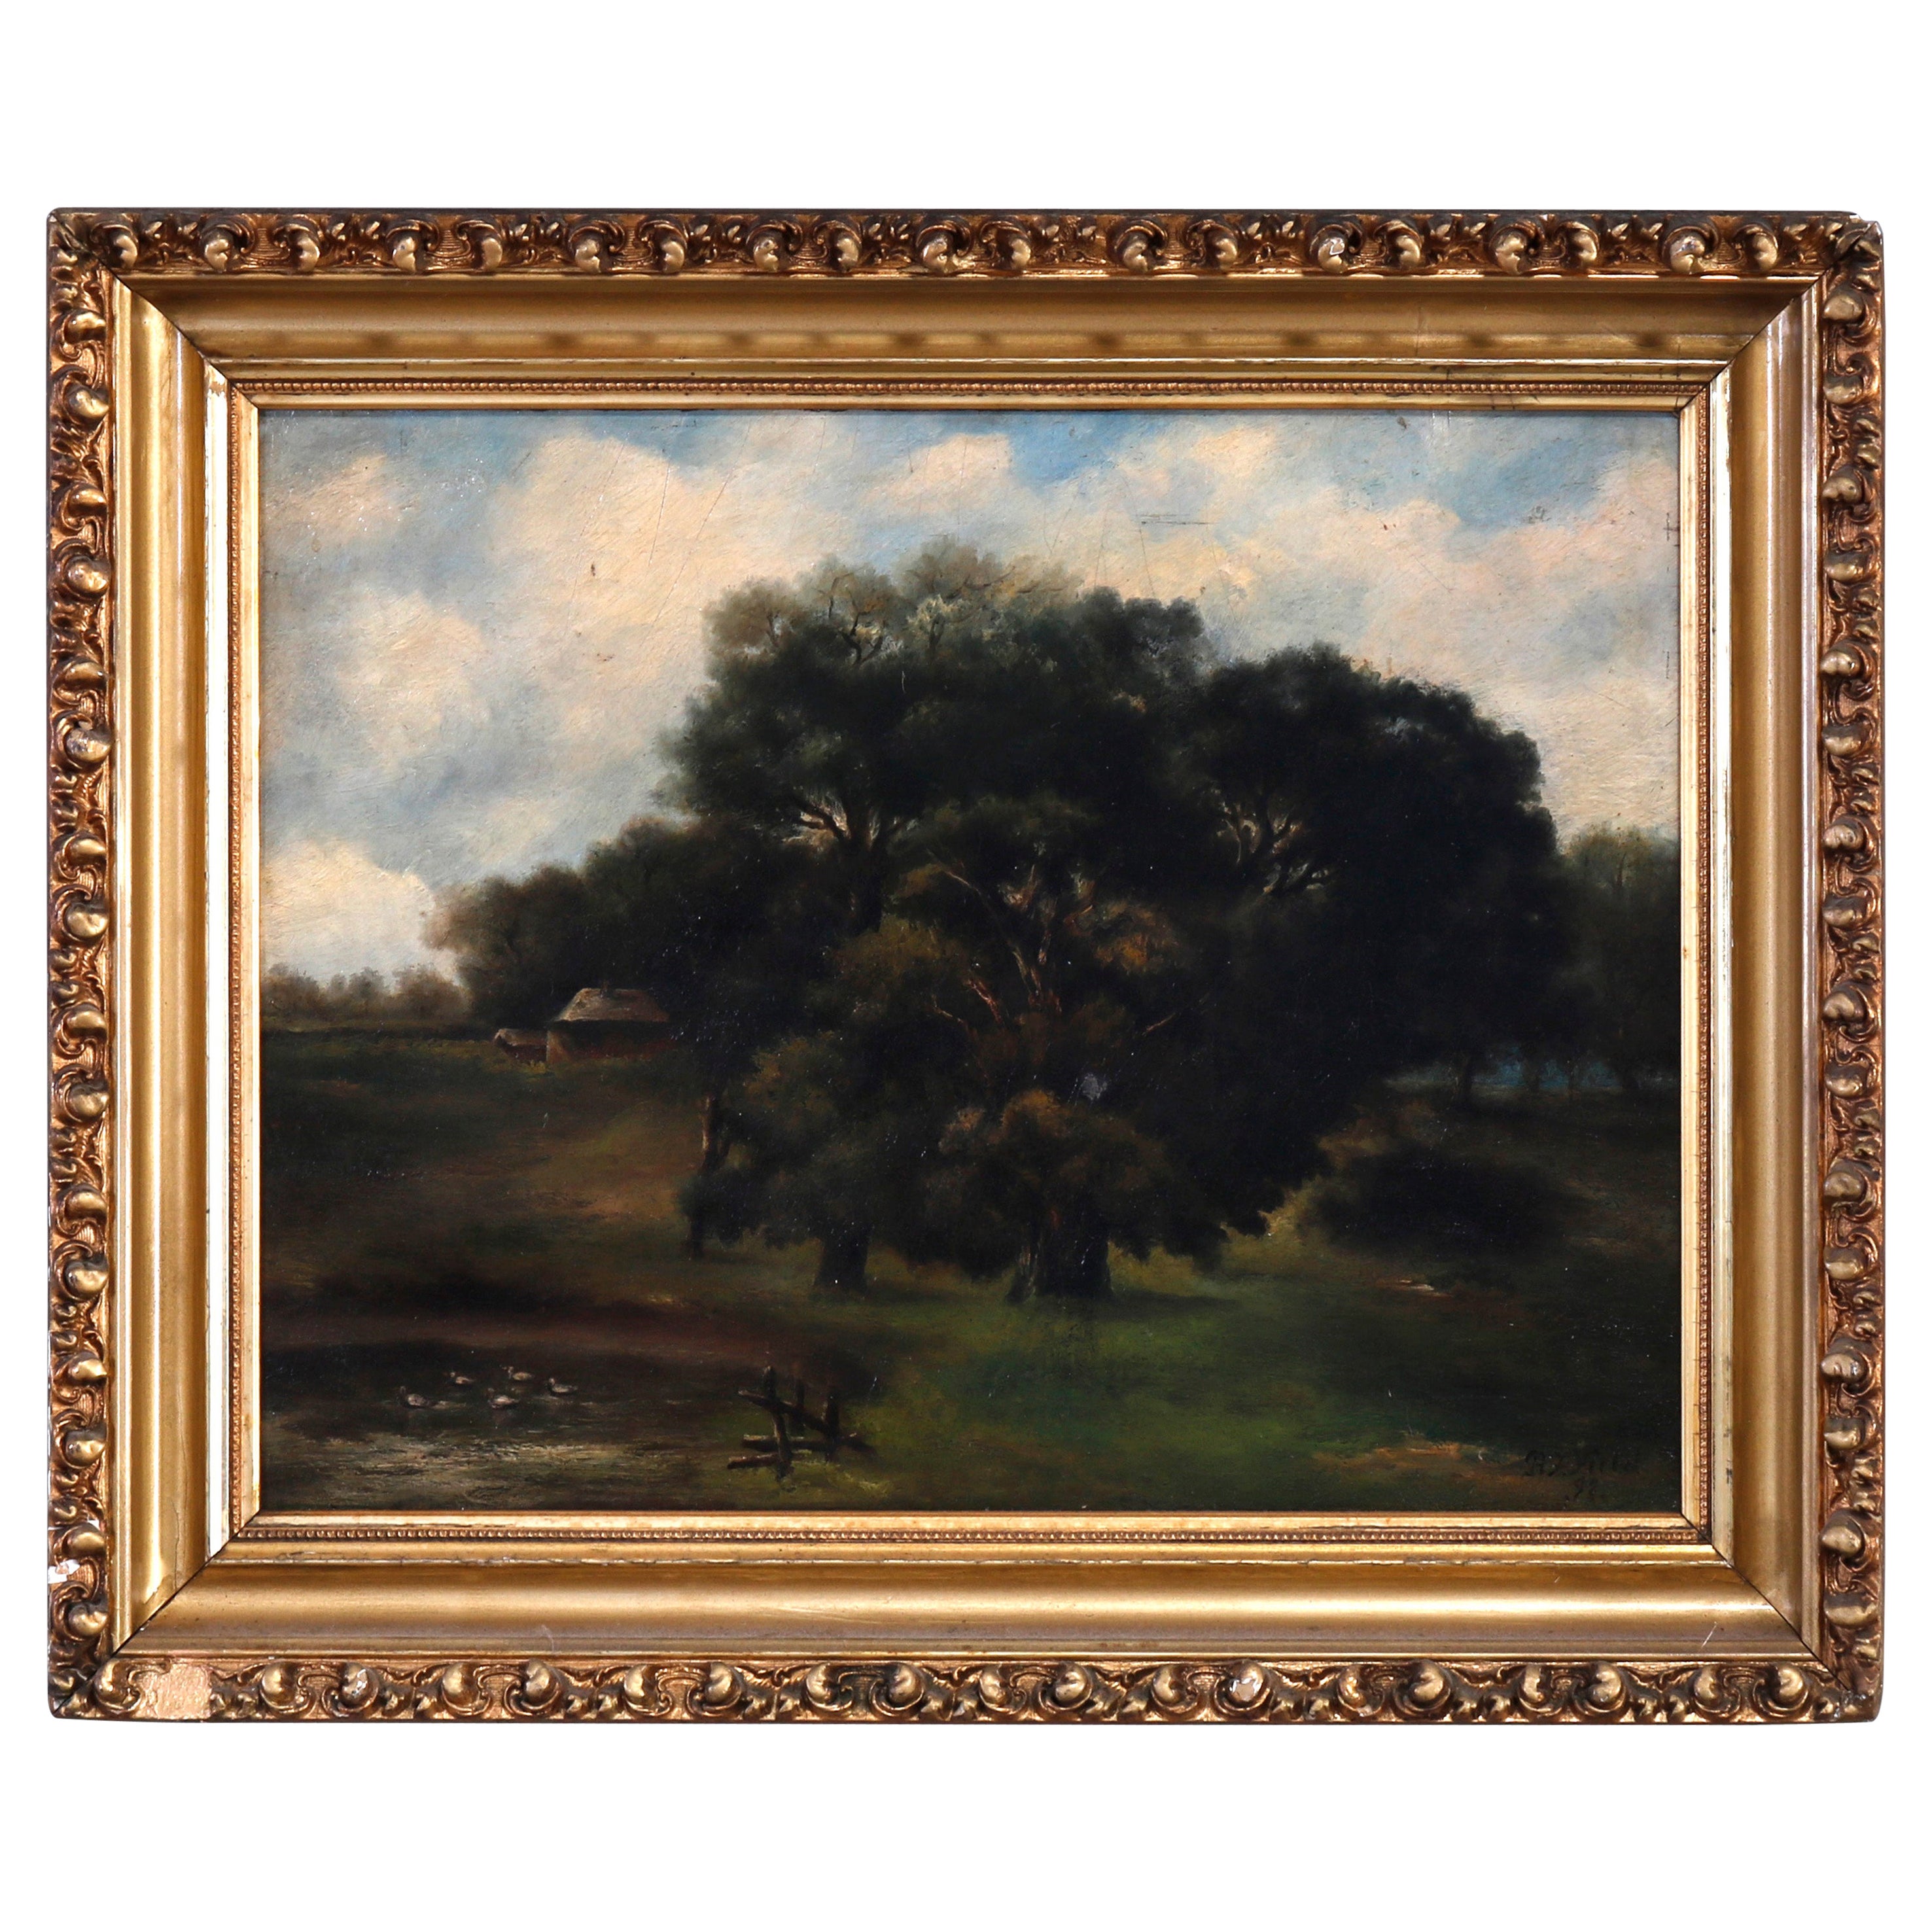 Antique English Oil on Board Landscape Painting by R.F. Filed, 1890